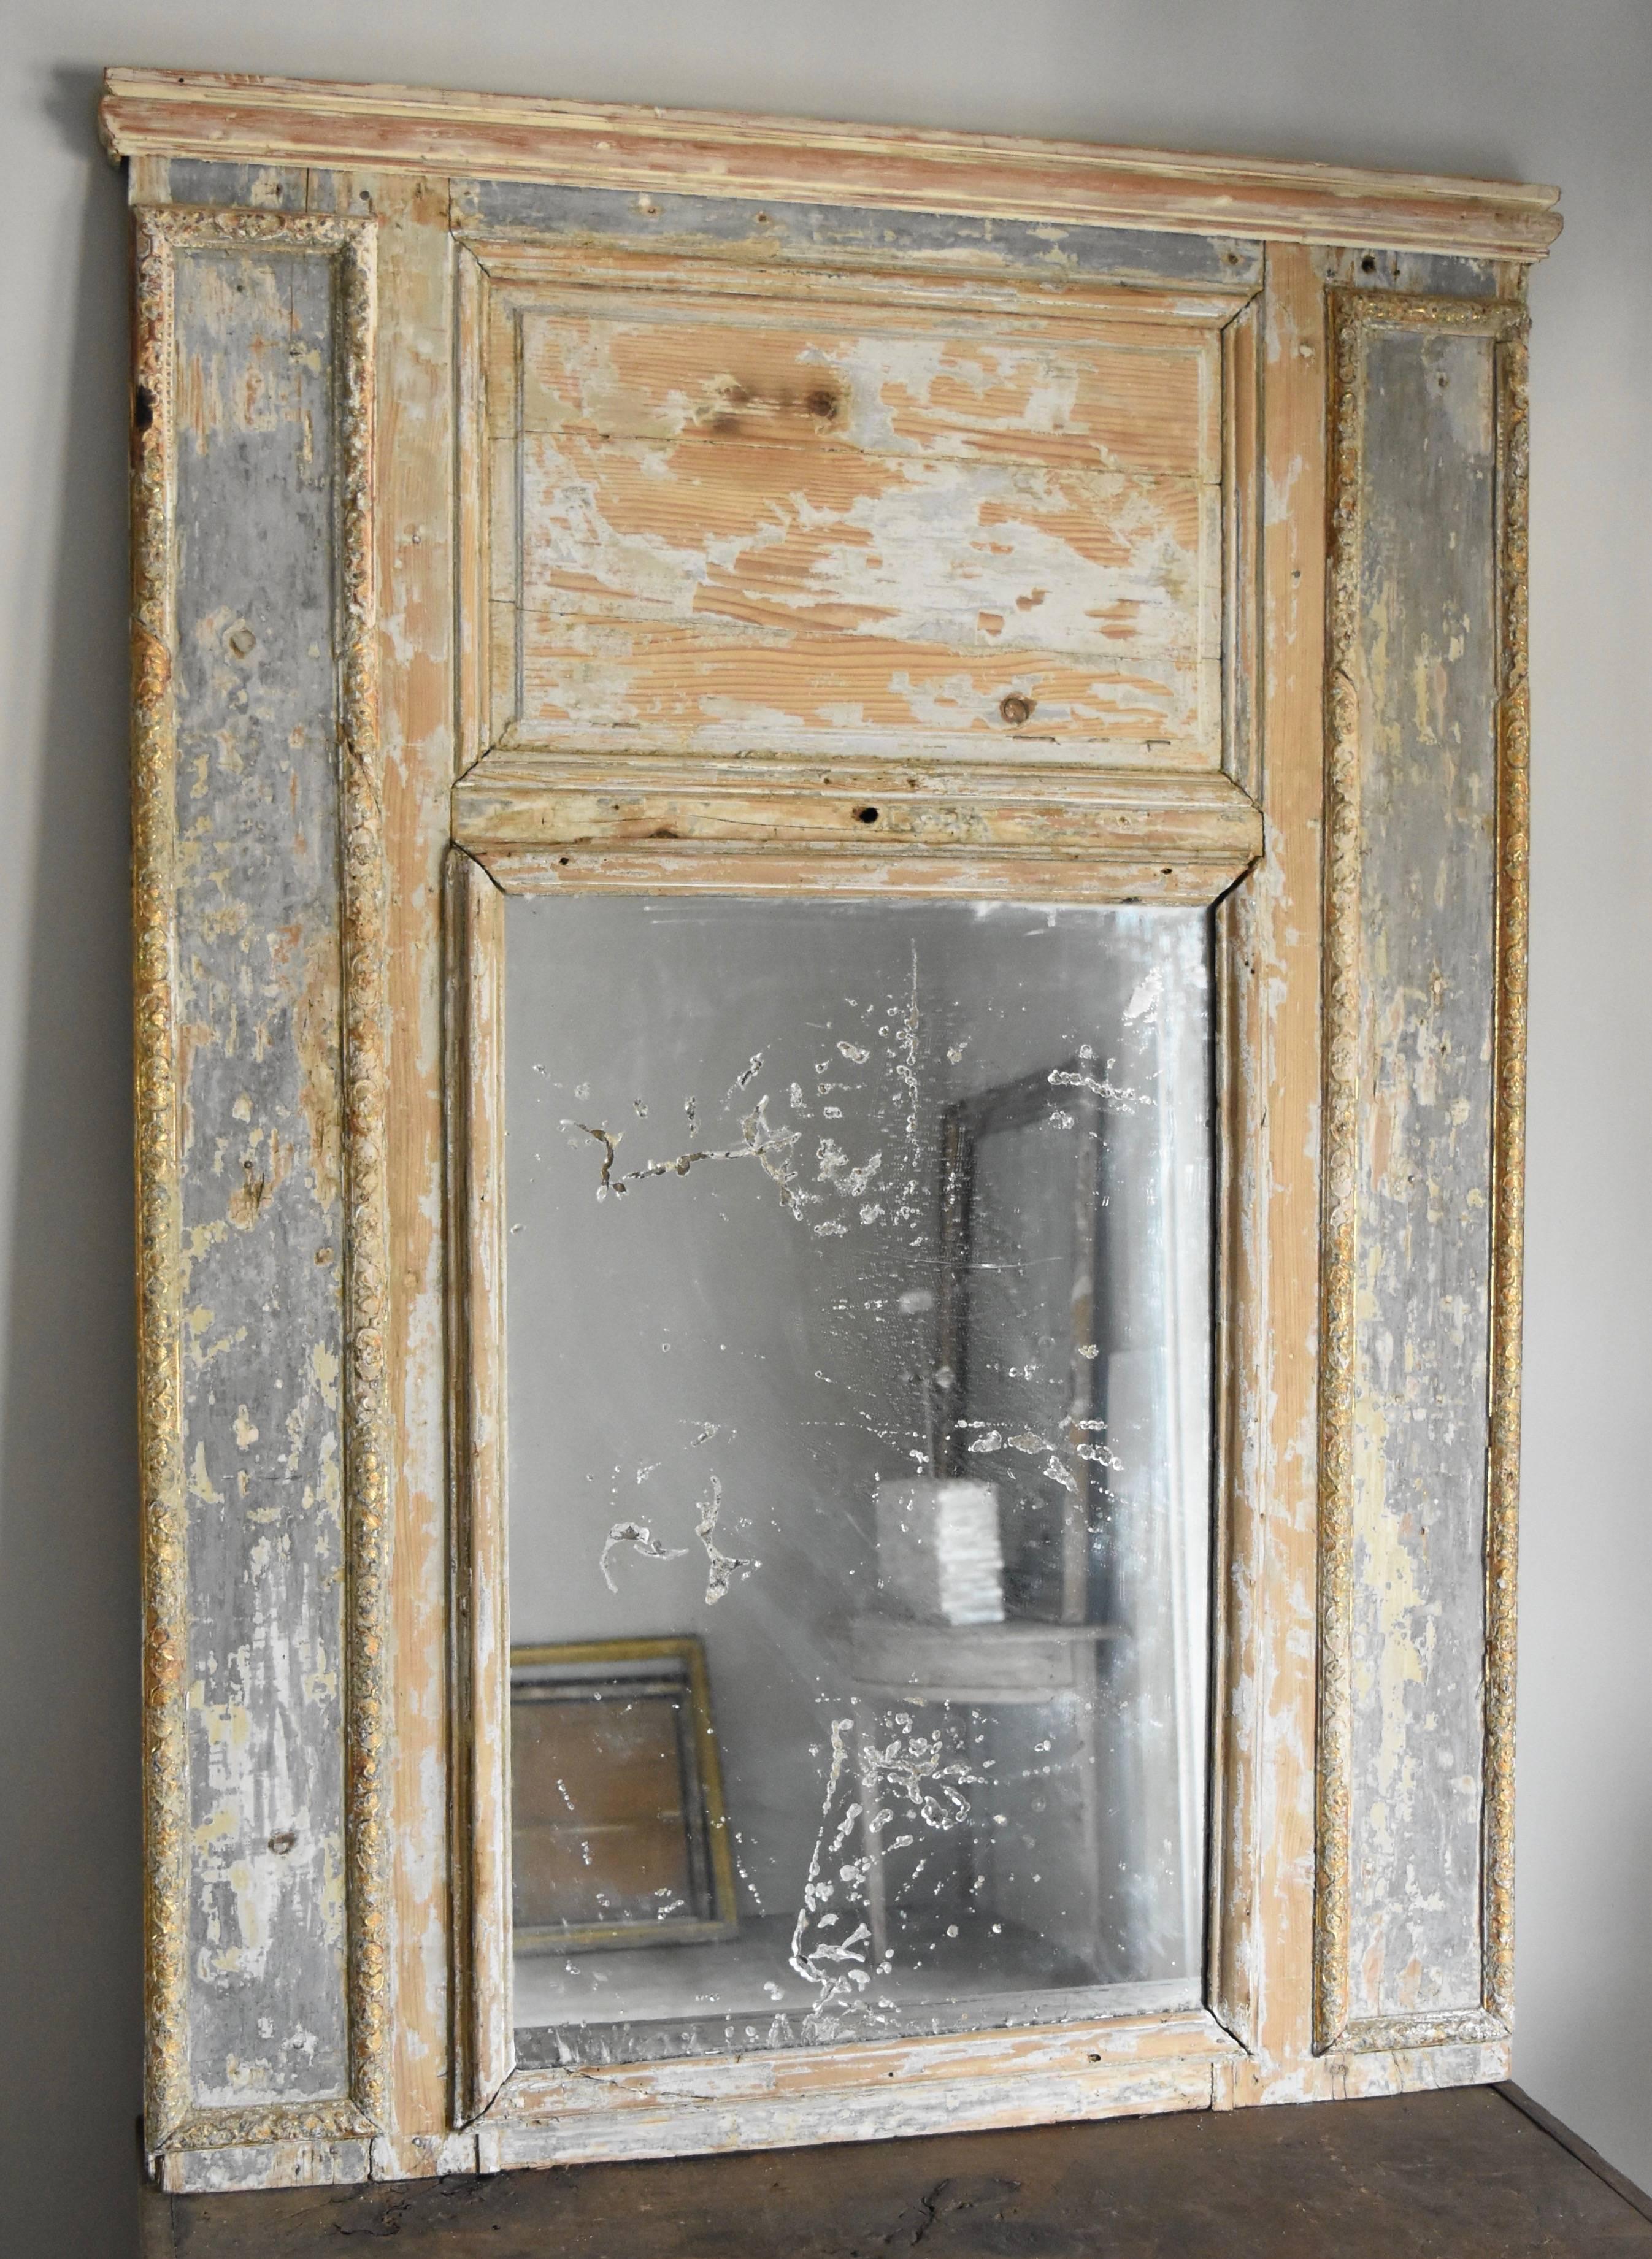 19th Century French Trumeau Mirror That's Distressed Painted Pine and Old Glass 1